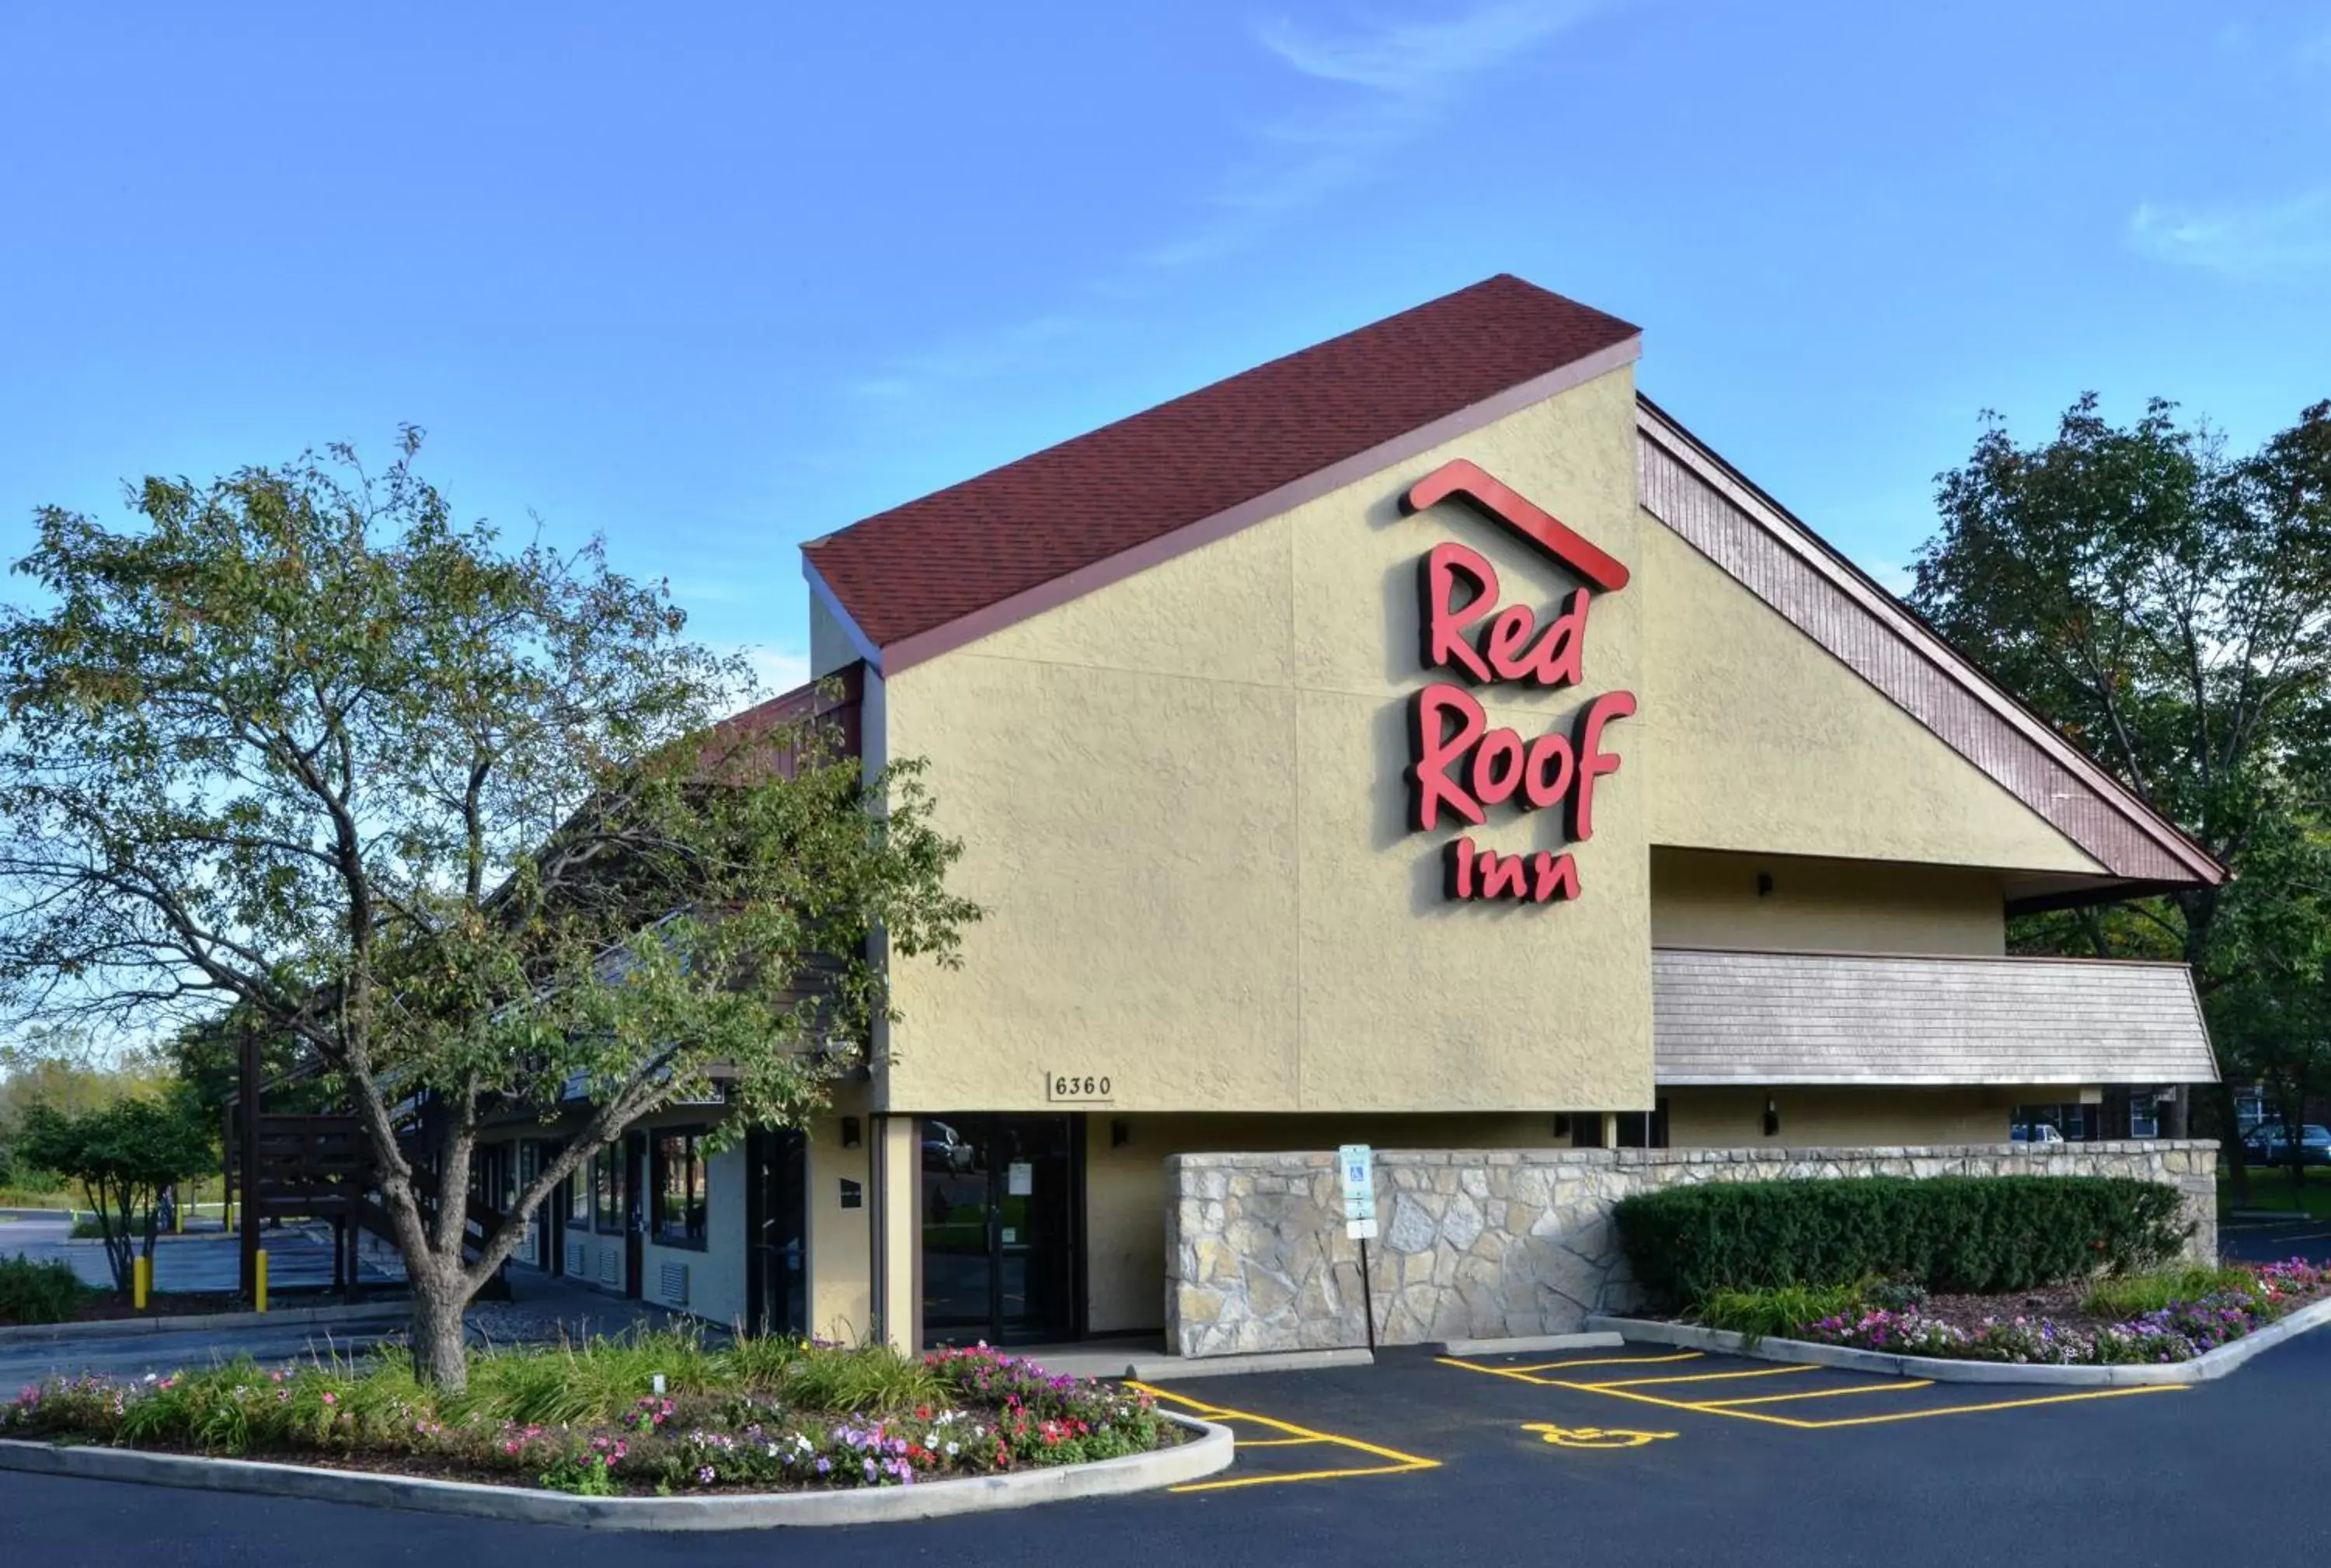 Property building, Facade/Entrance in Red Roof Inn Milwaukee Airport